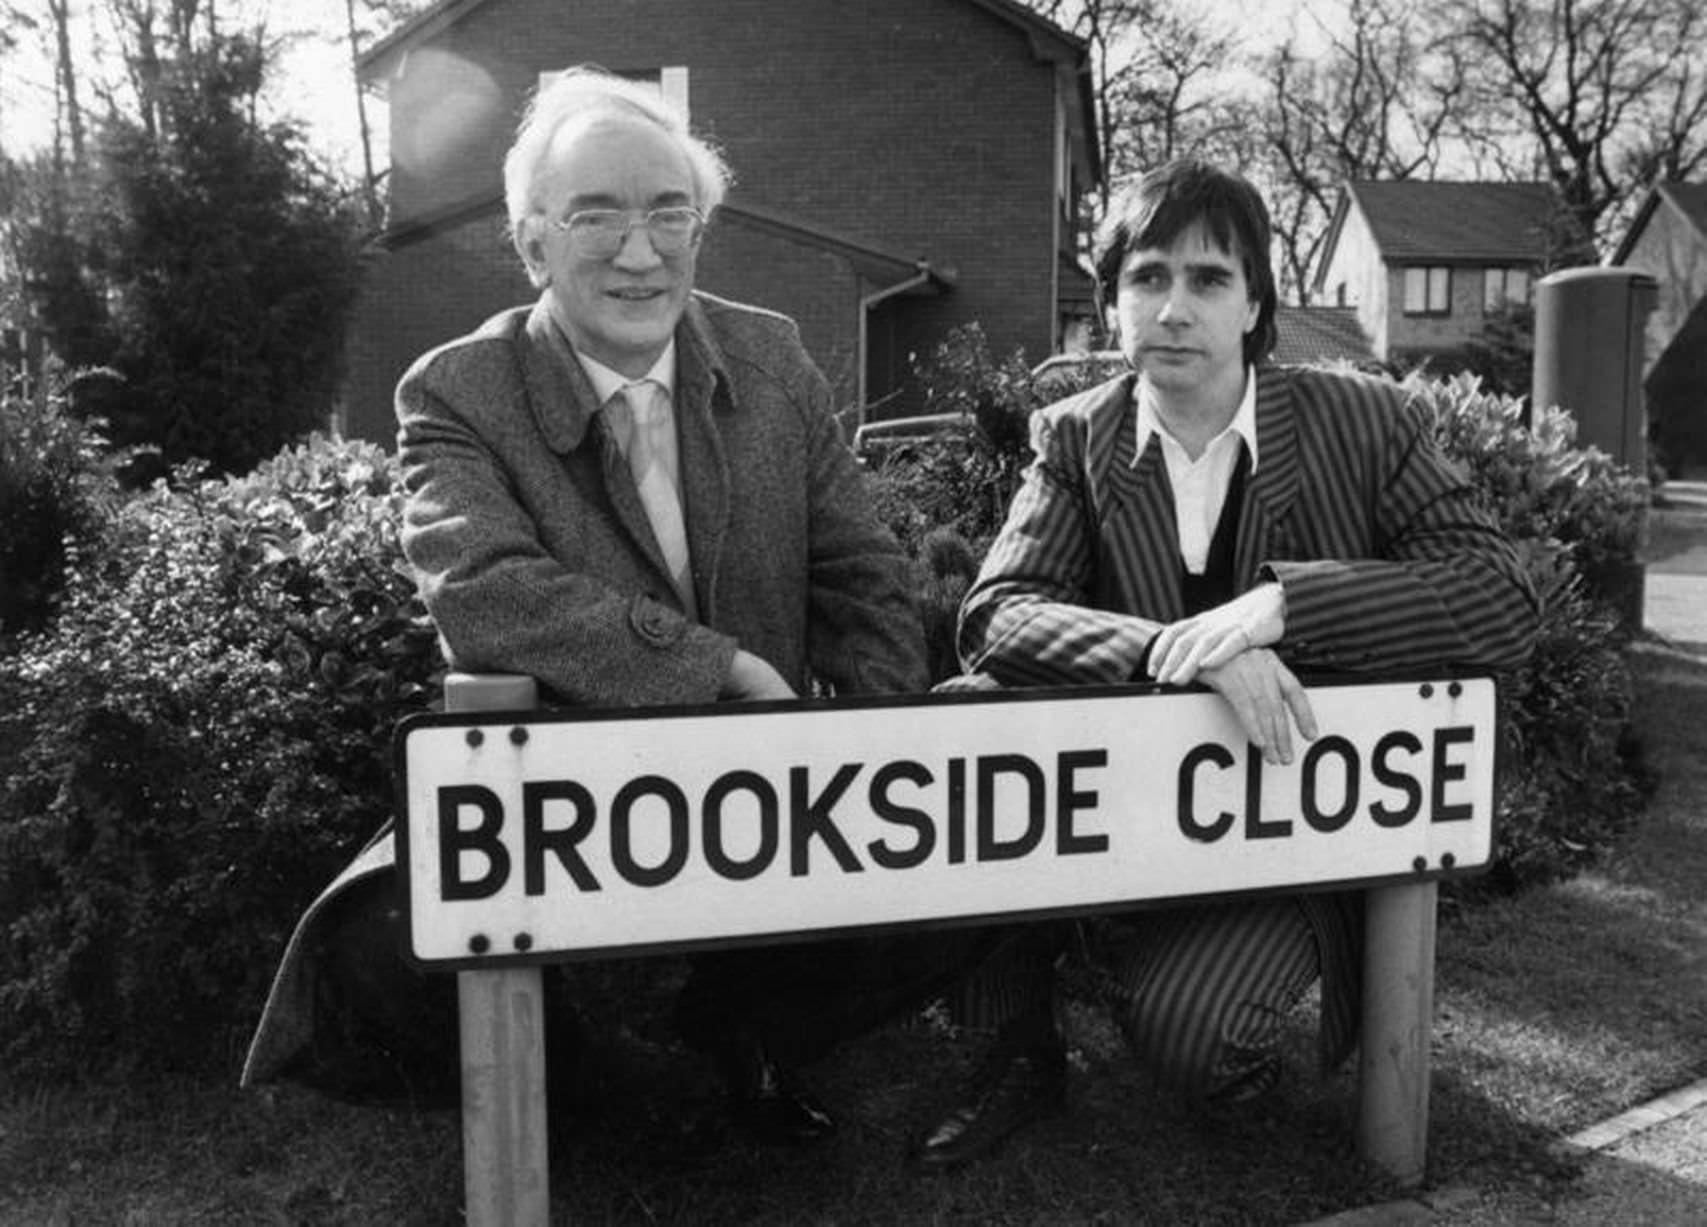 John Stalker, Deputy Chief Constable of Greater Manchester Police with Phil Redmond on the Brookside set, Liverpool, Monday 16th March 1987.